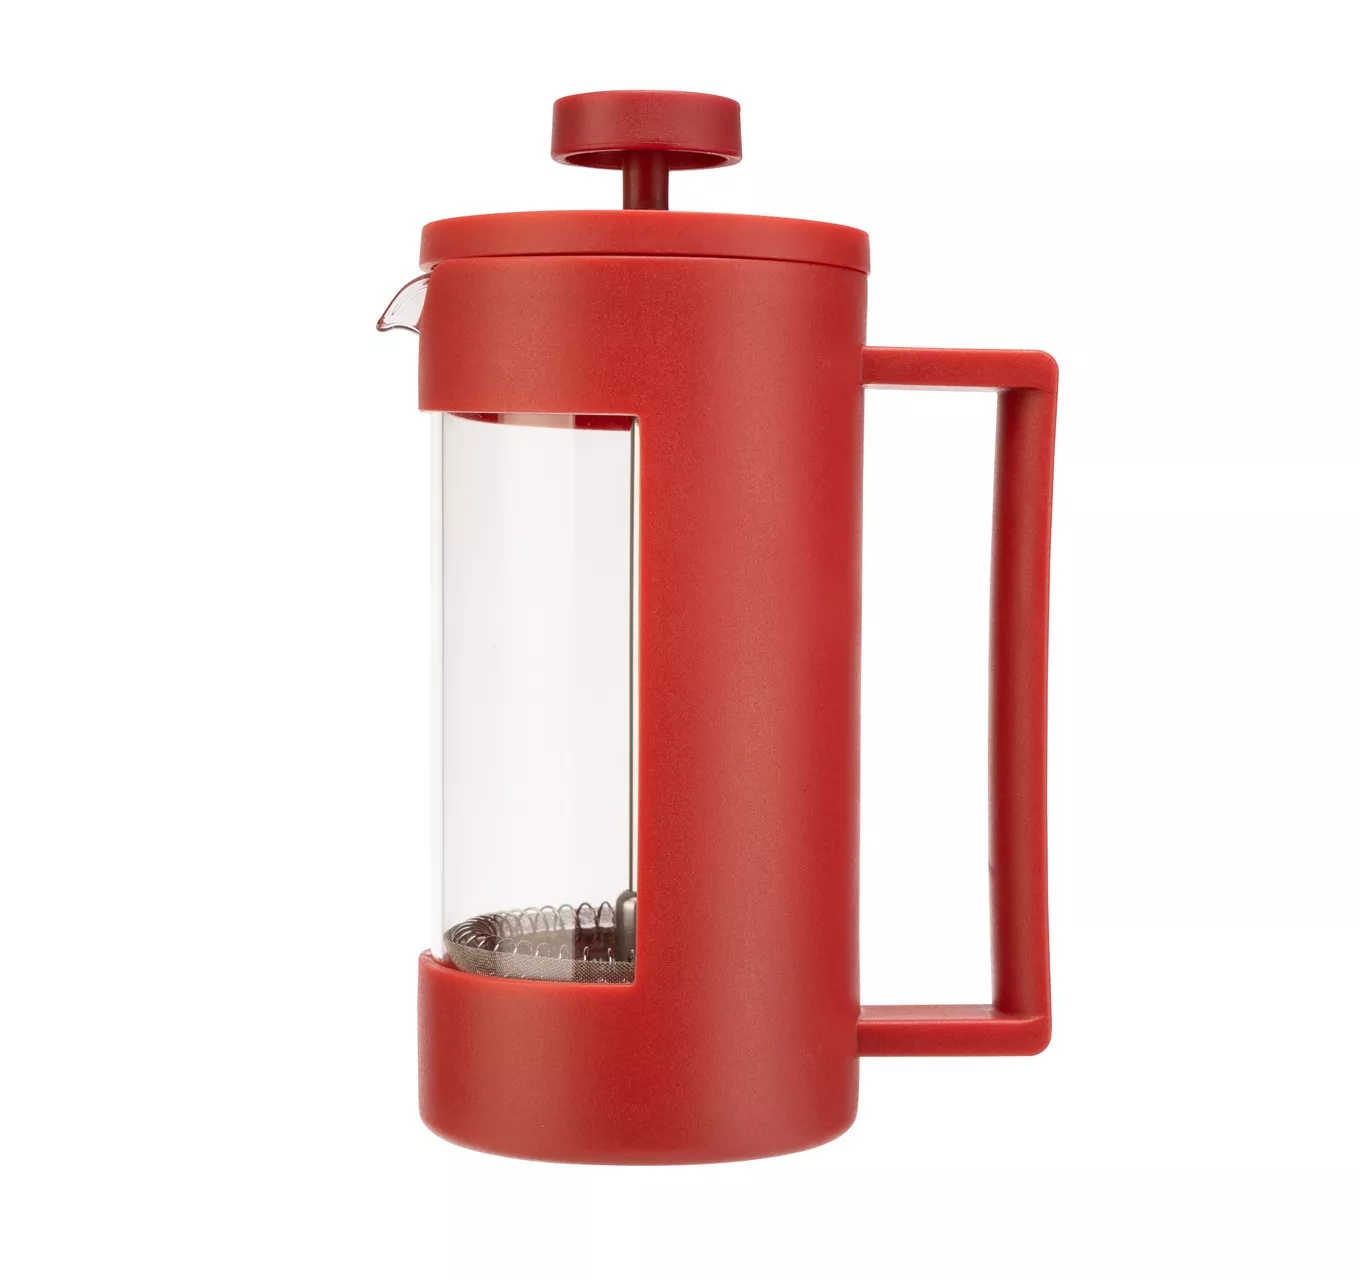 Cafetiere 3 Cup - Red